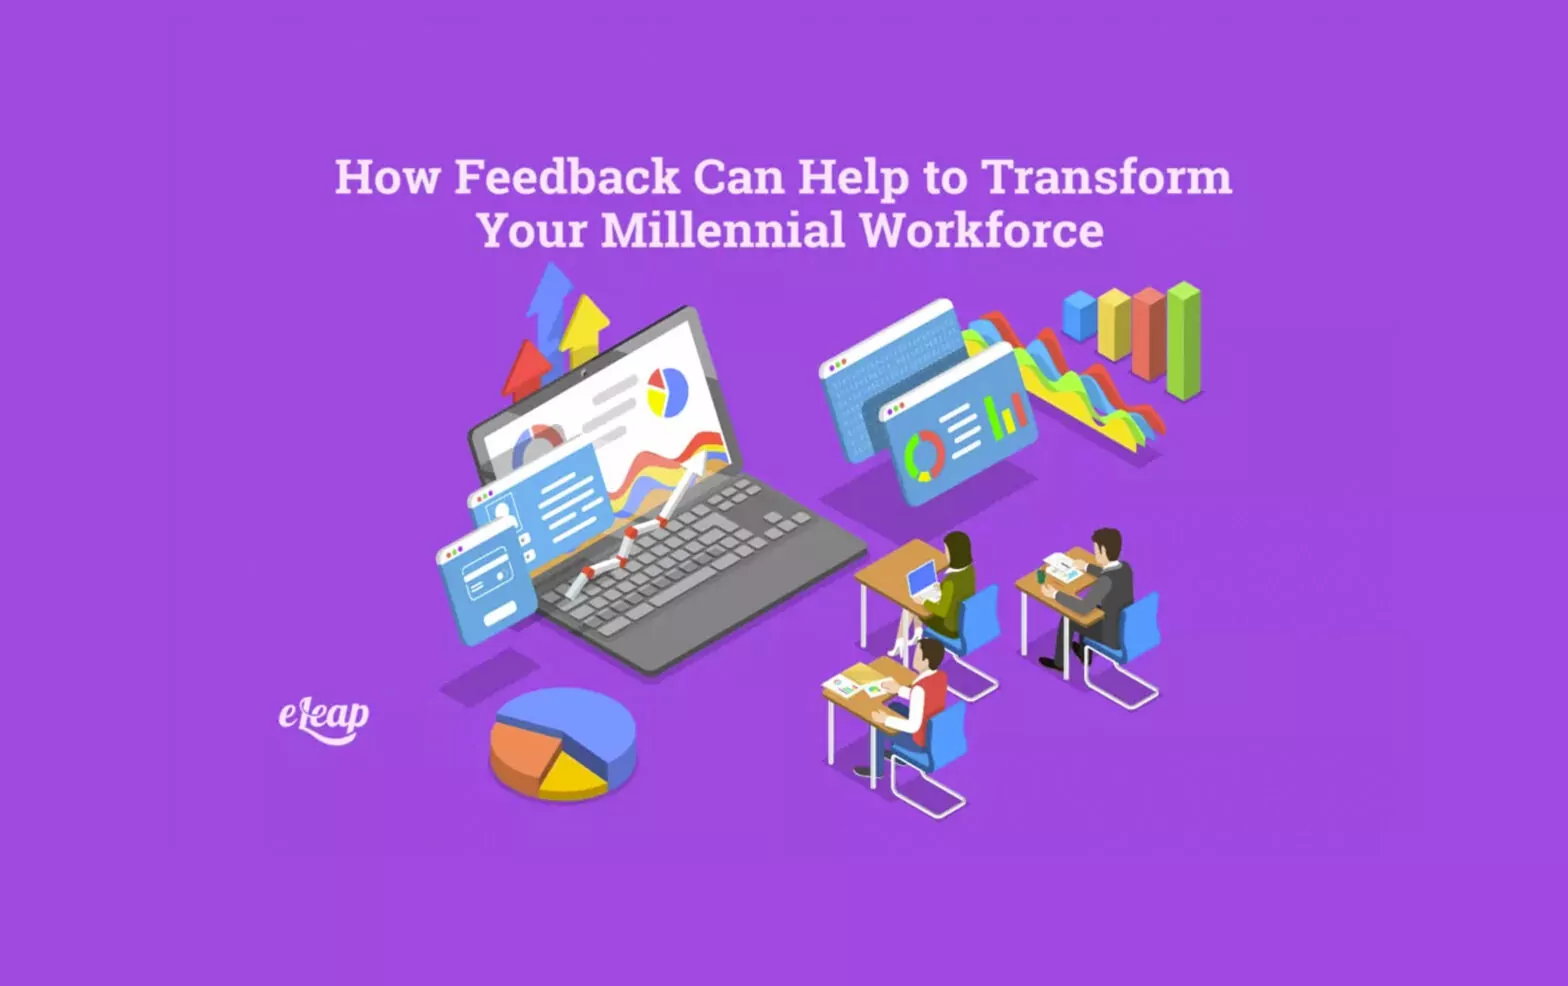 How Feedback Can Help to Transform Your Millennial Workforce